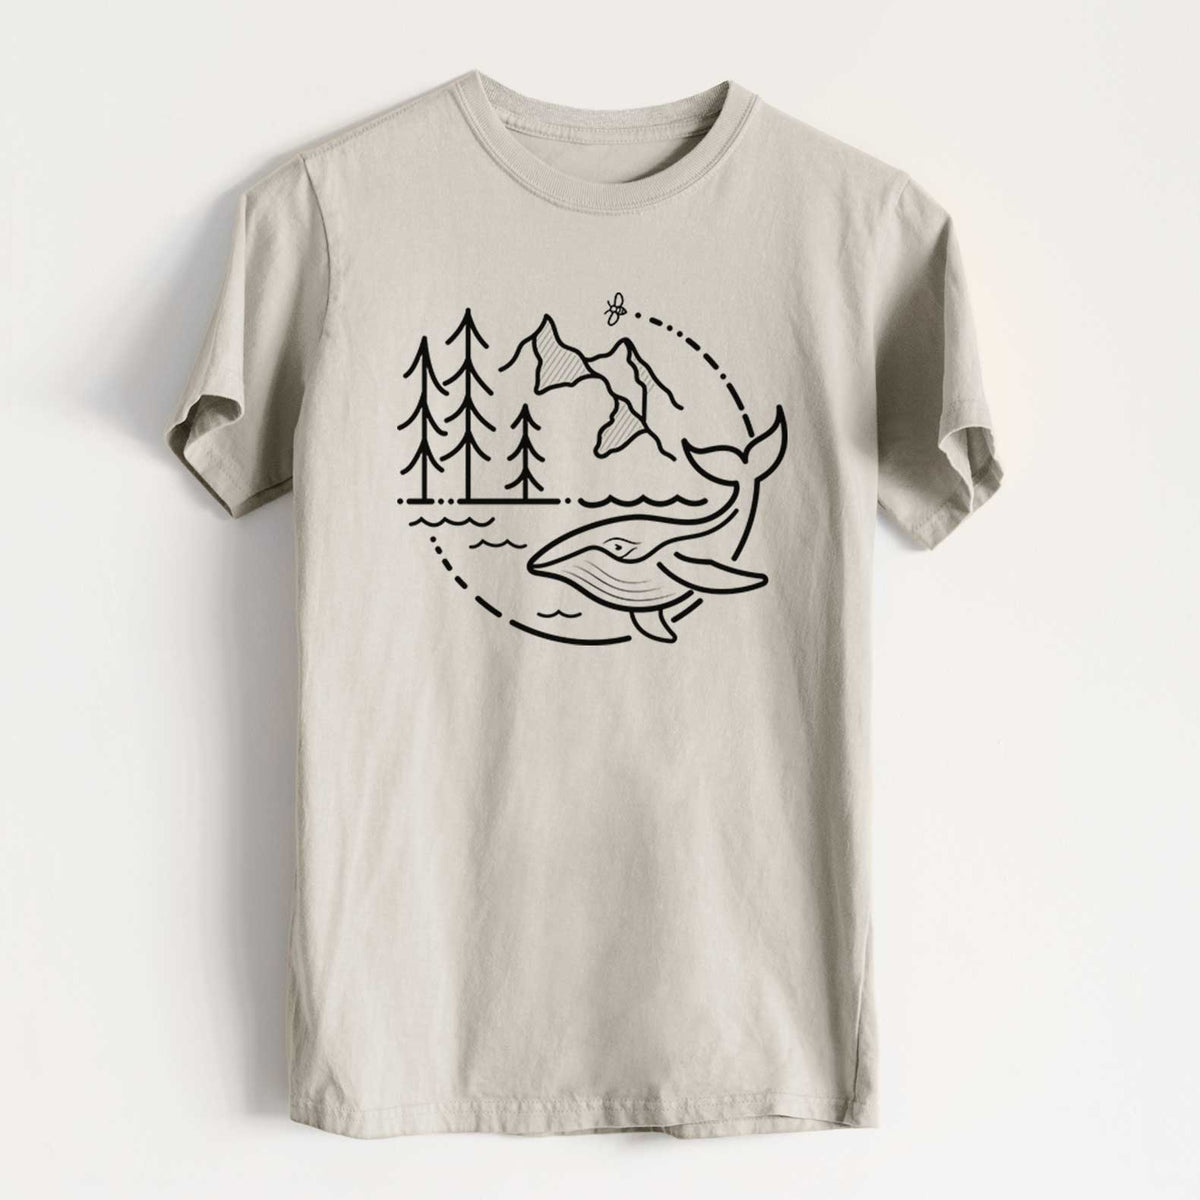 It&#39;s All Connected - Heavyweight Men&#39;s 100% Organic Cotton Tee